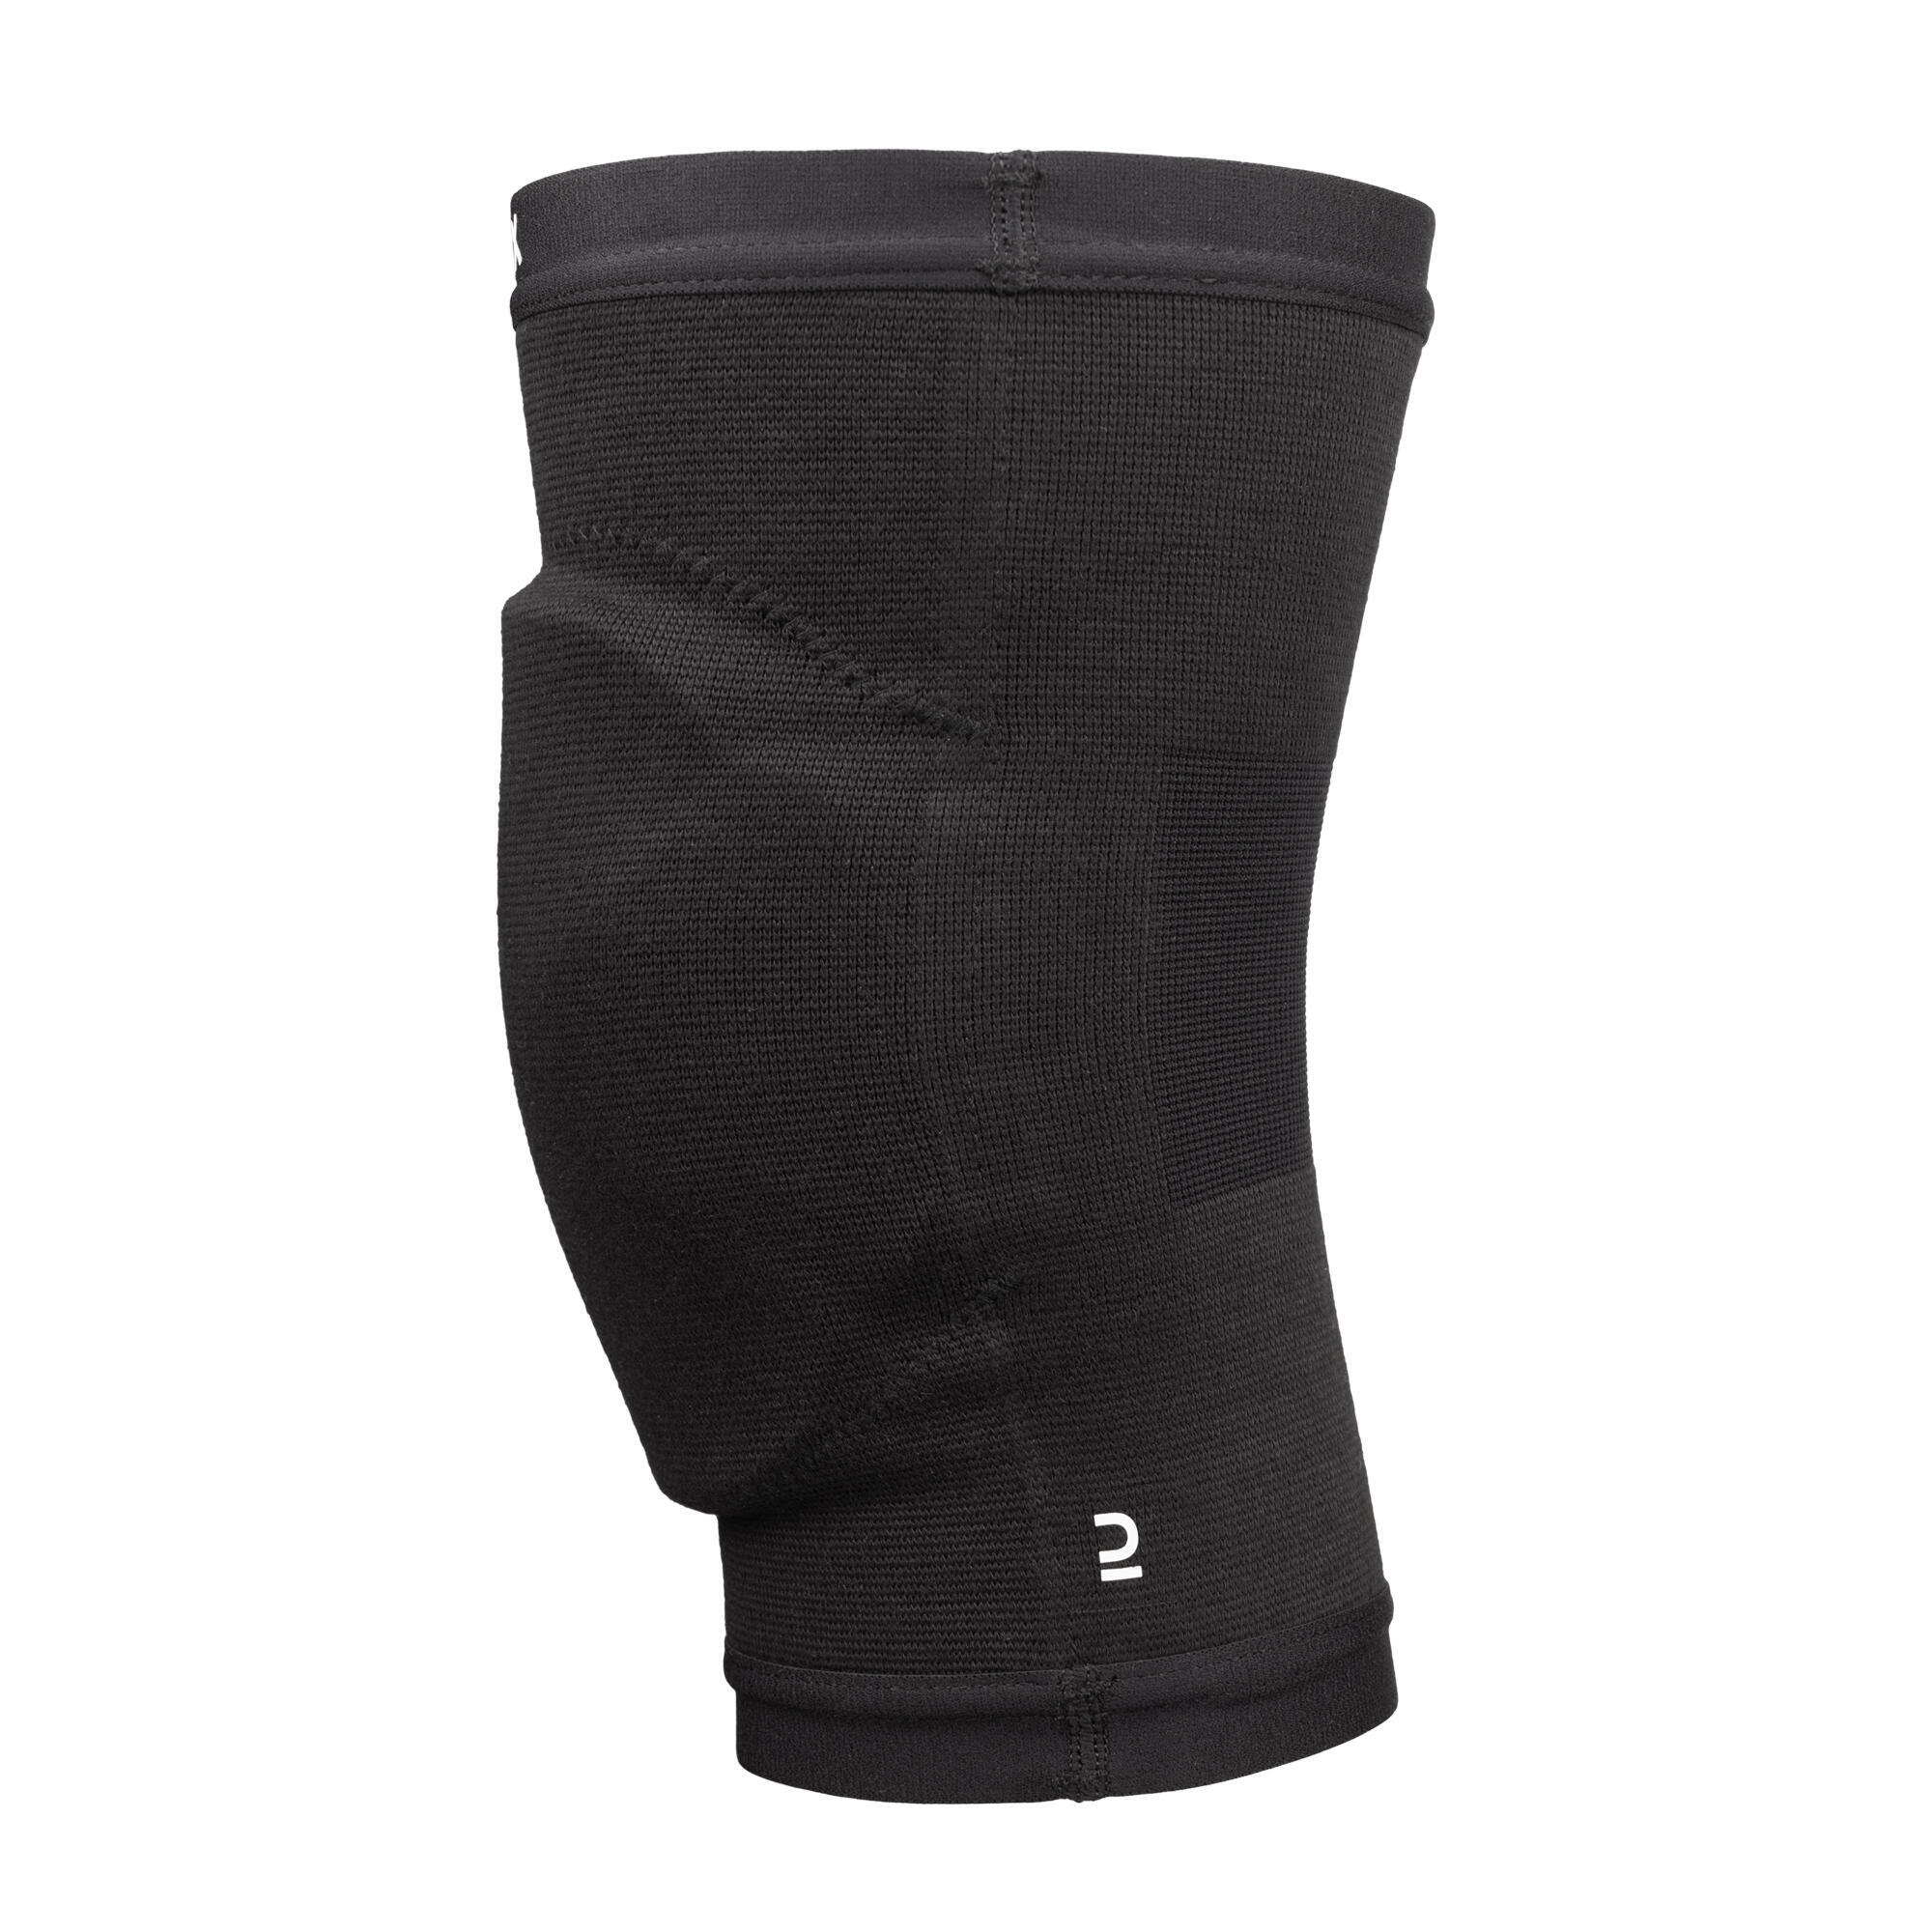 Volleyball Knee Pads VKP500 - Black 4/5